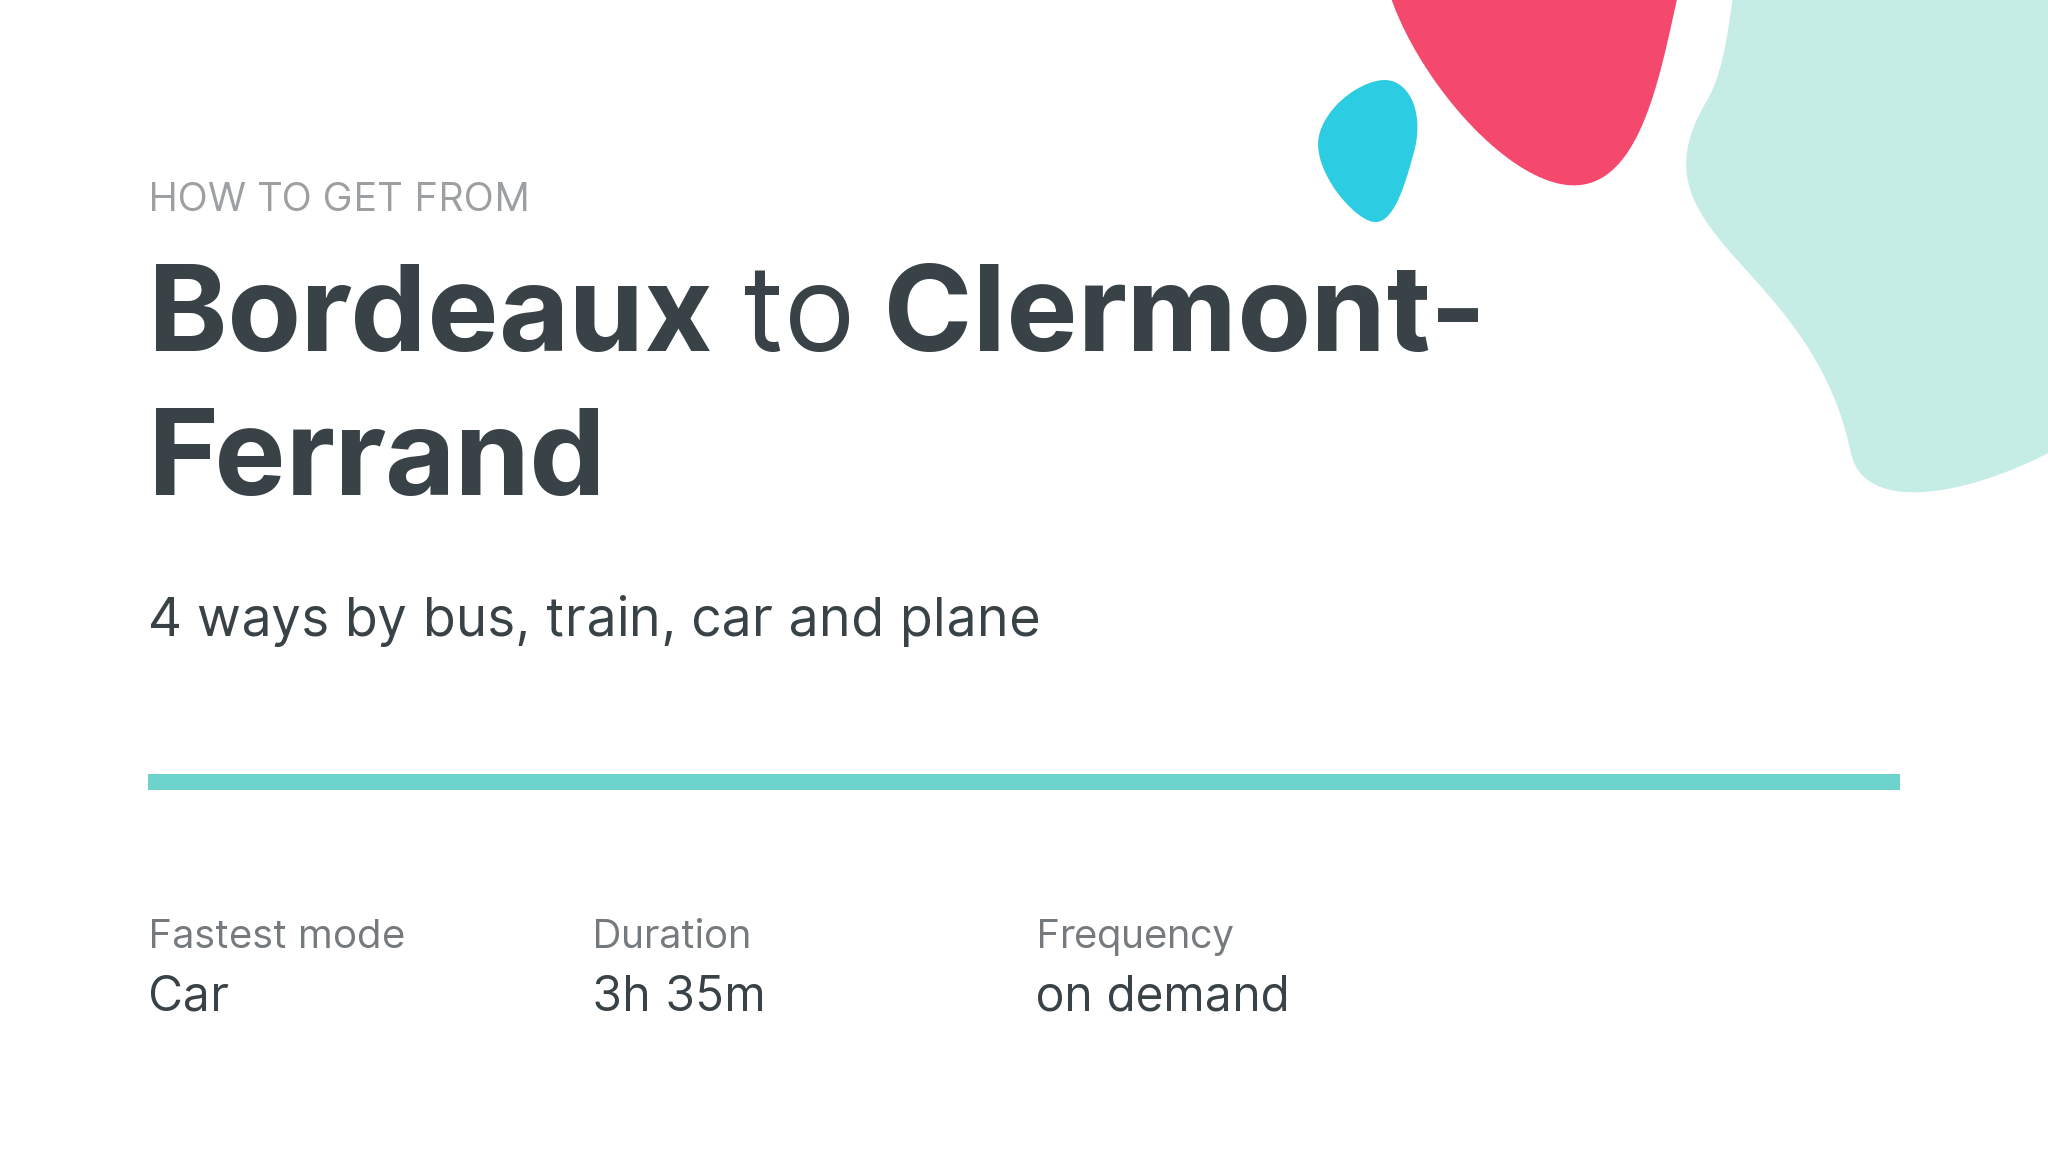 How do I get from Bordeaux to Clermont-Ferrand